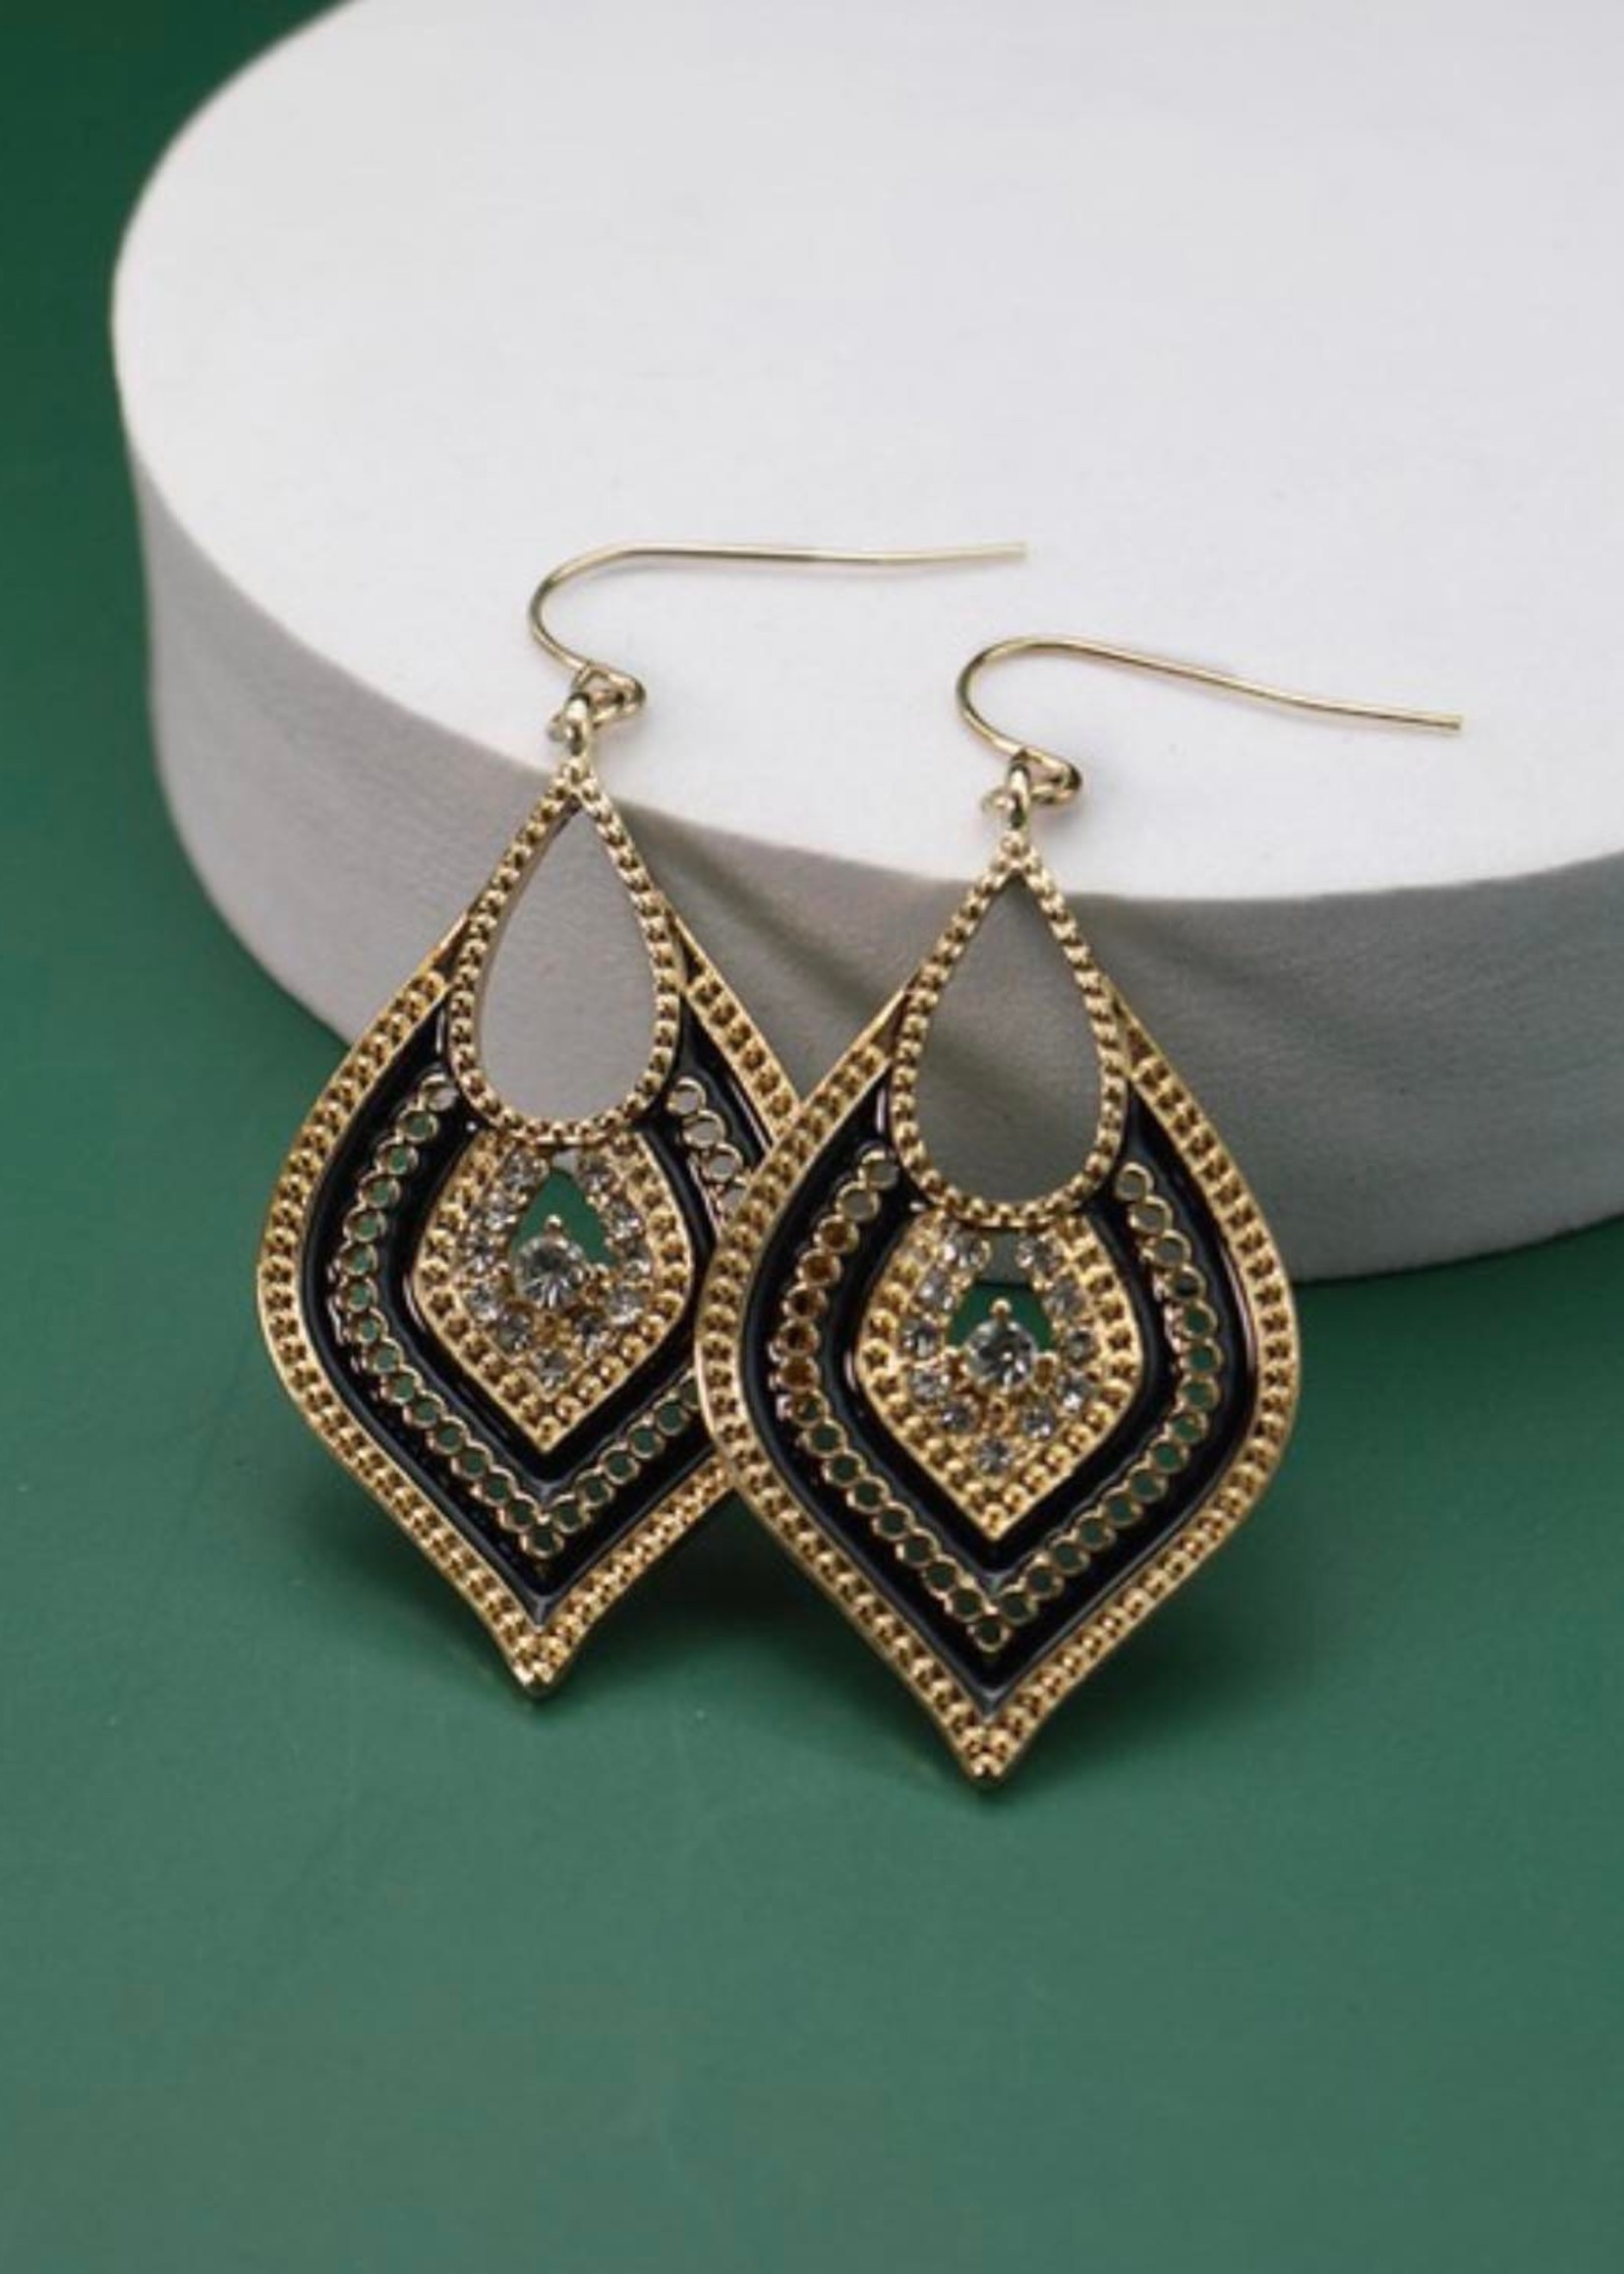 Wall to Wall Moroccan beaded earrings - ivory teal or black